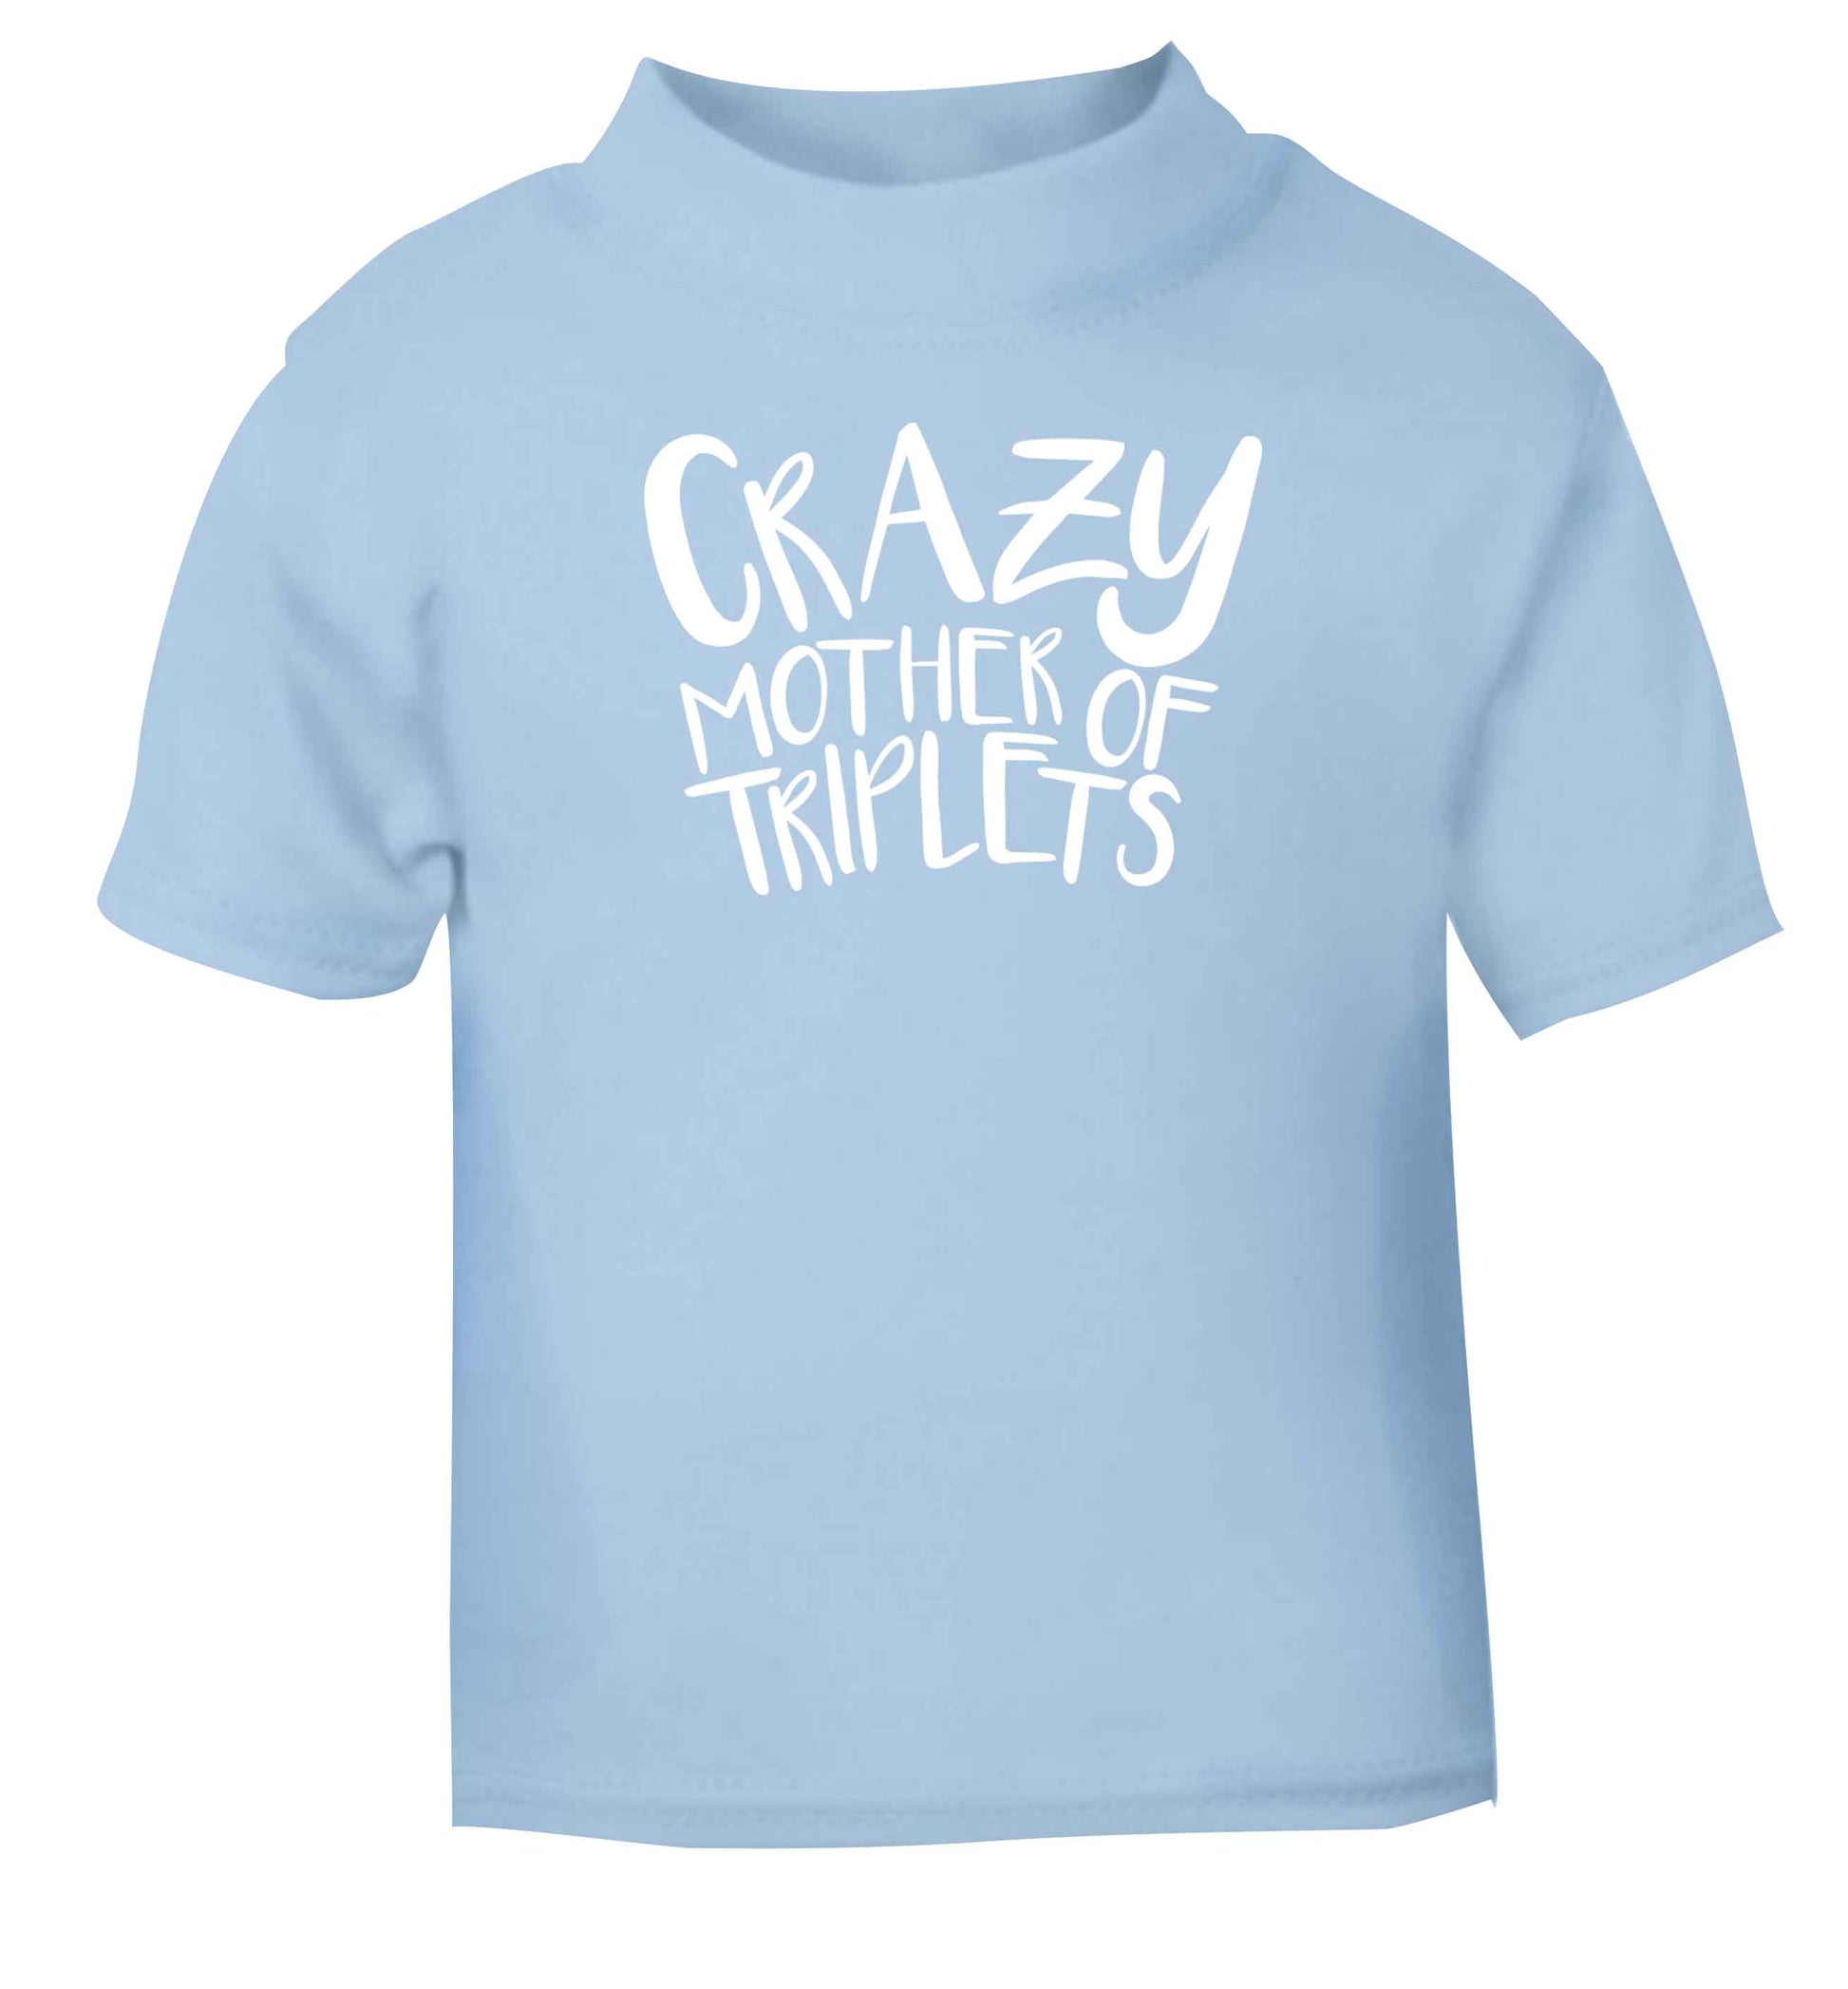 Crazy mother of triplets light blue baby toddler Tshirt 2 Years